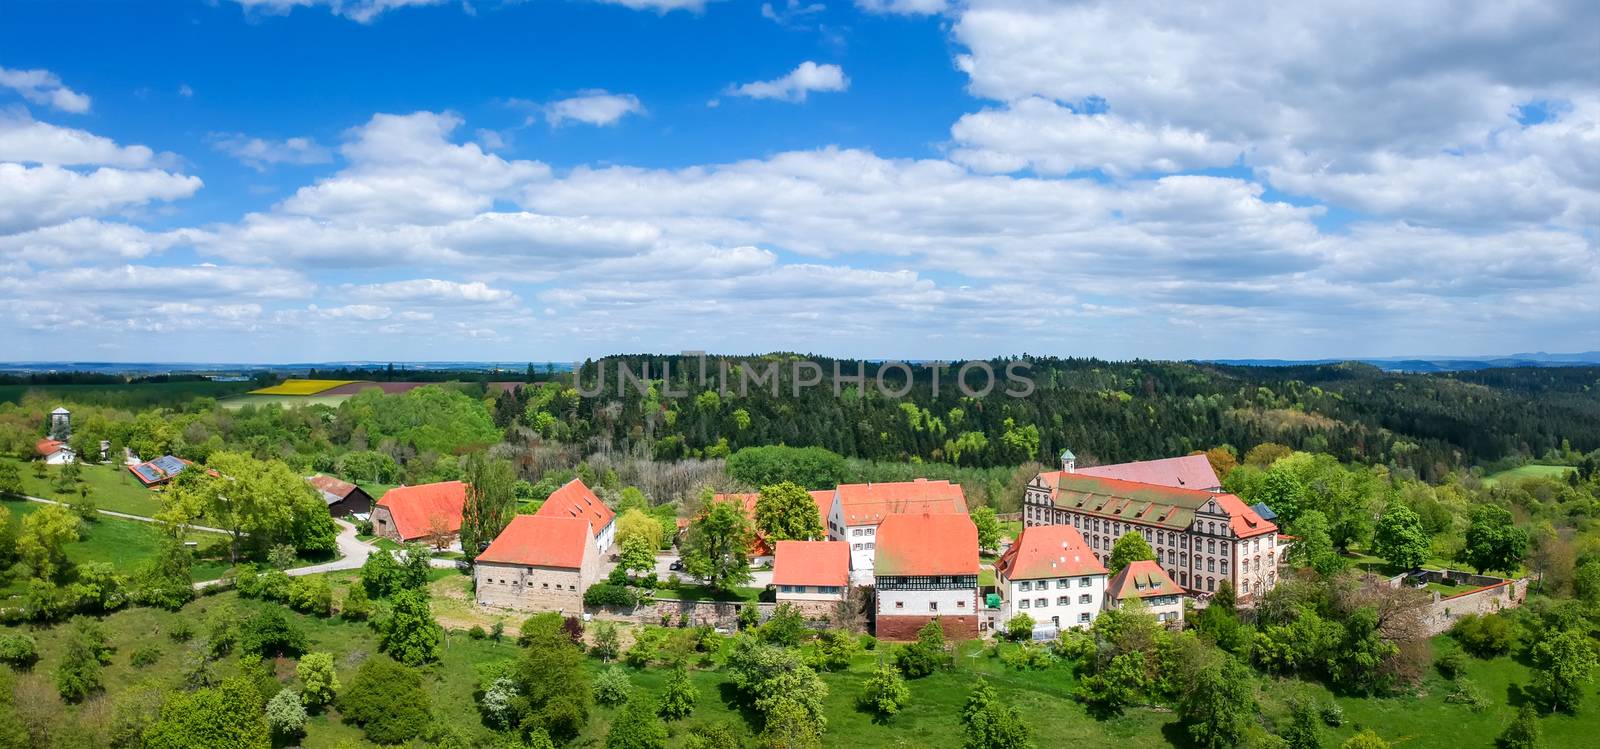 Kirchberg convent monastery located at Sulz Germany by magann